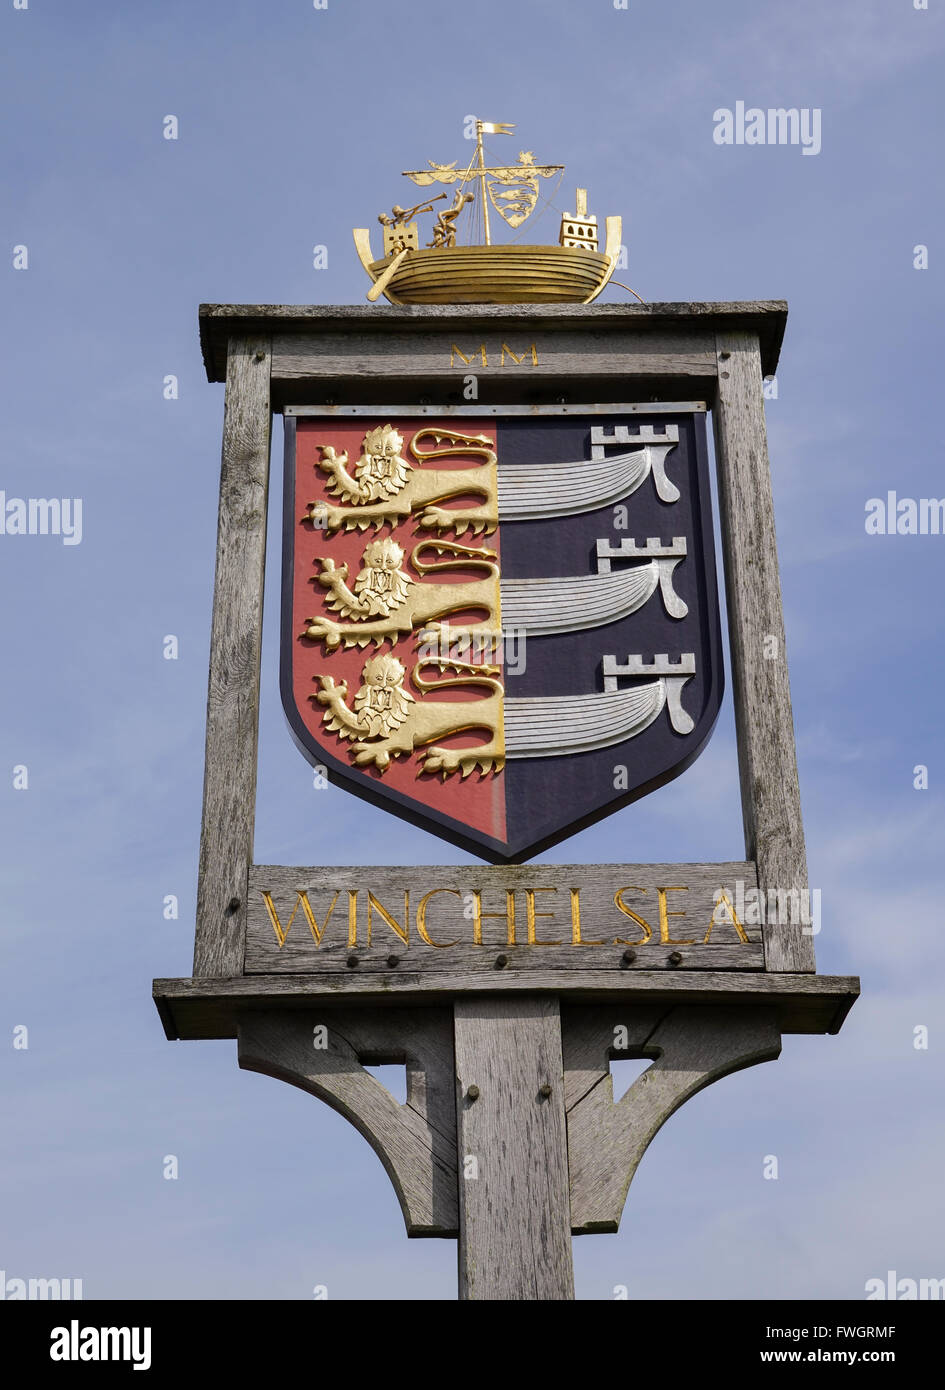 Millennium Town Sign, Winchelsea, East Sussex, England. -1 Stock Photo